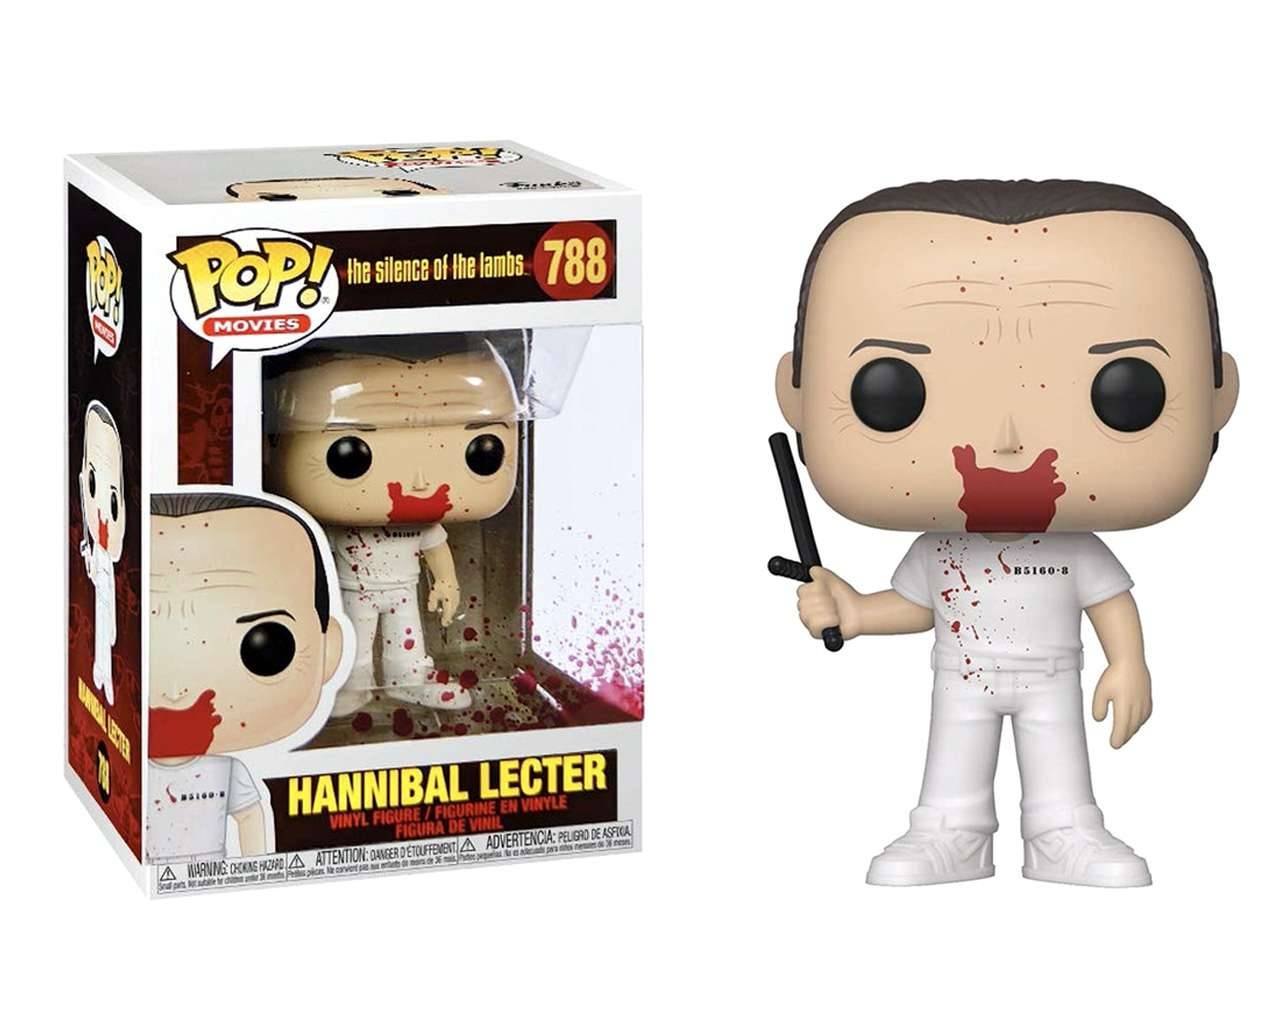 Hannibal Lecter (Bloody) - The Silence of the Lambs Pop! Vinyl